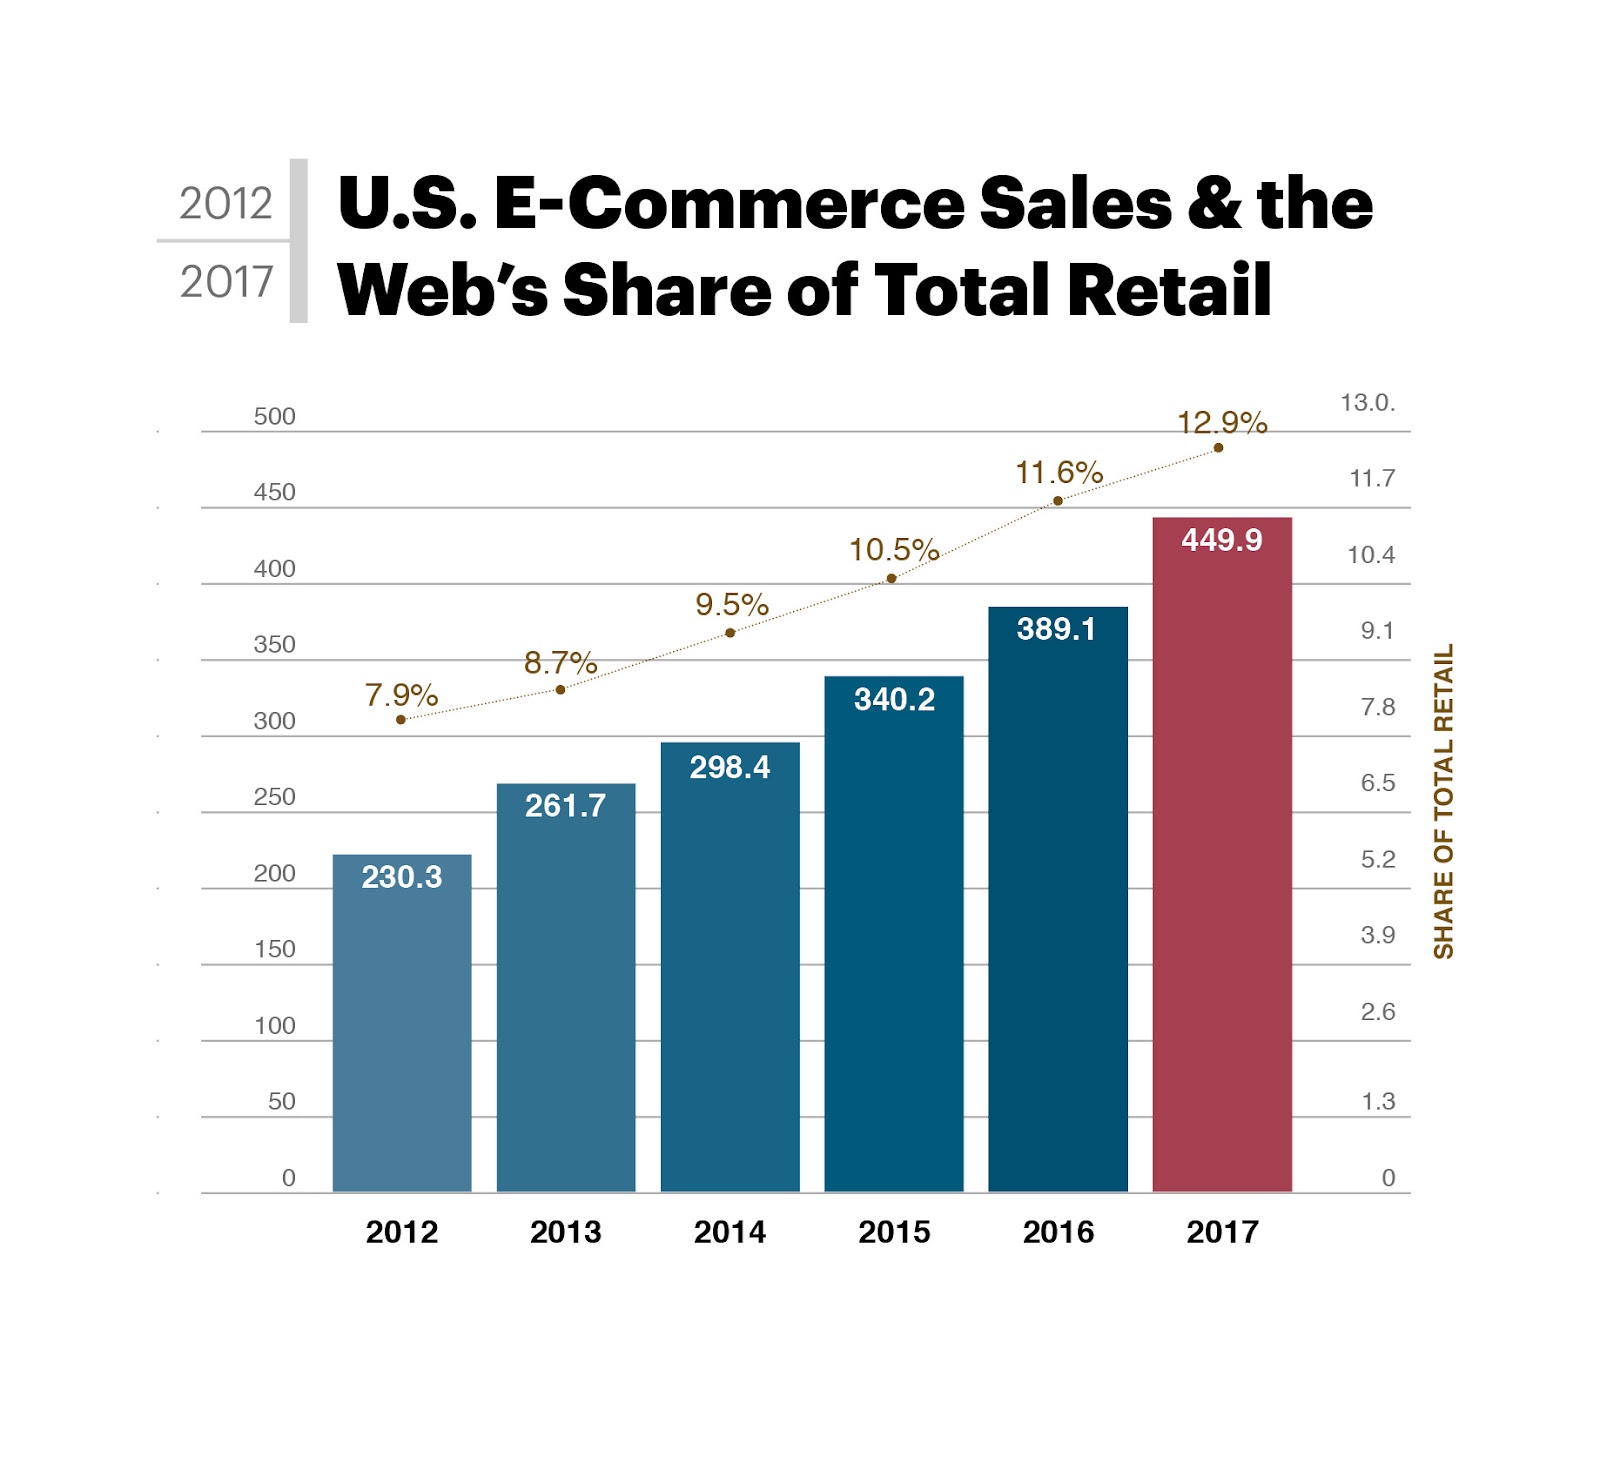 U.S. E-Commerce Sales & the Web's Share of Total Retail. From USD 230 billion in 2012 to USD 450 billion in 2017. From 8% to13%.